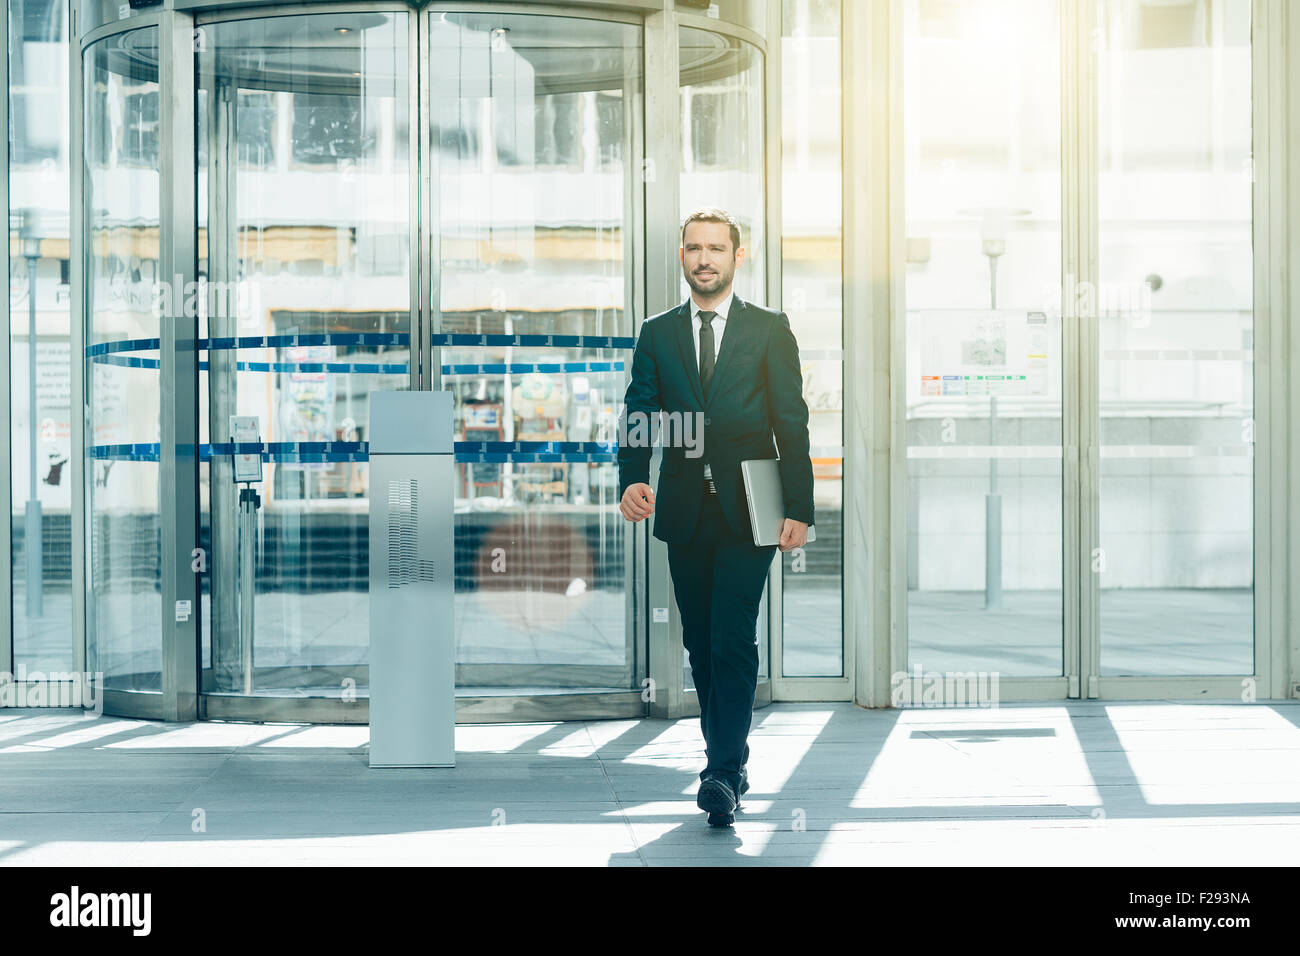 Businessman walking in entrance hall Stock Photo